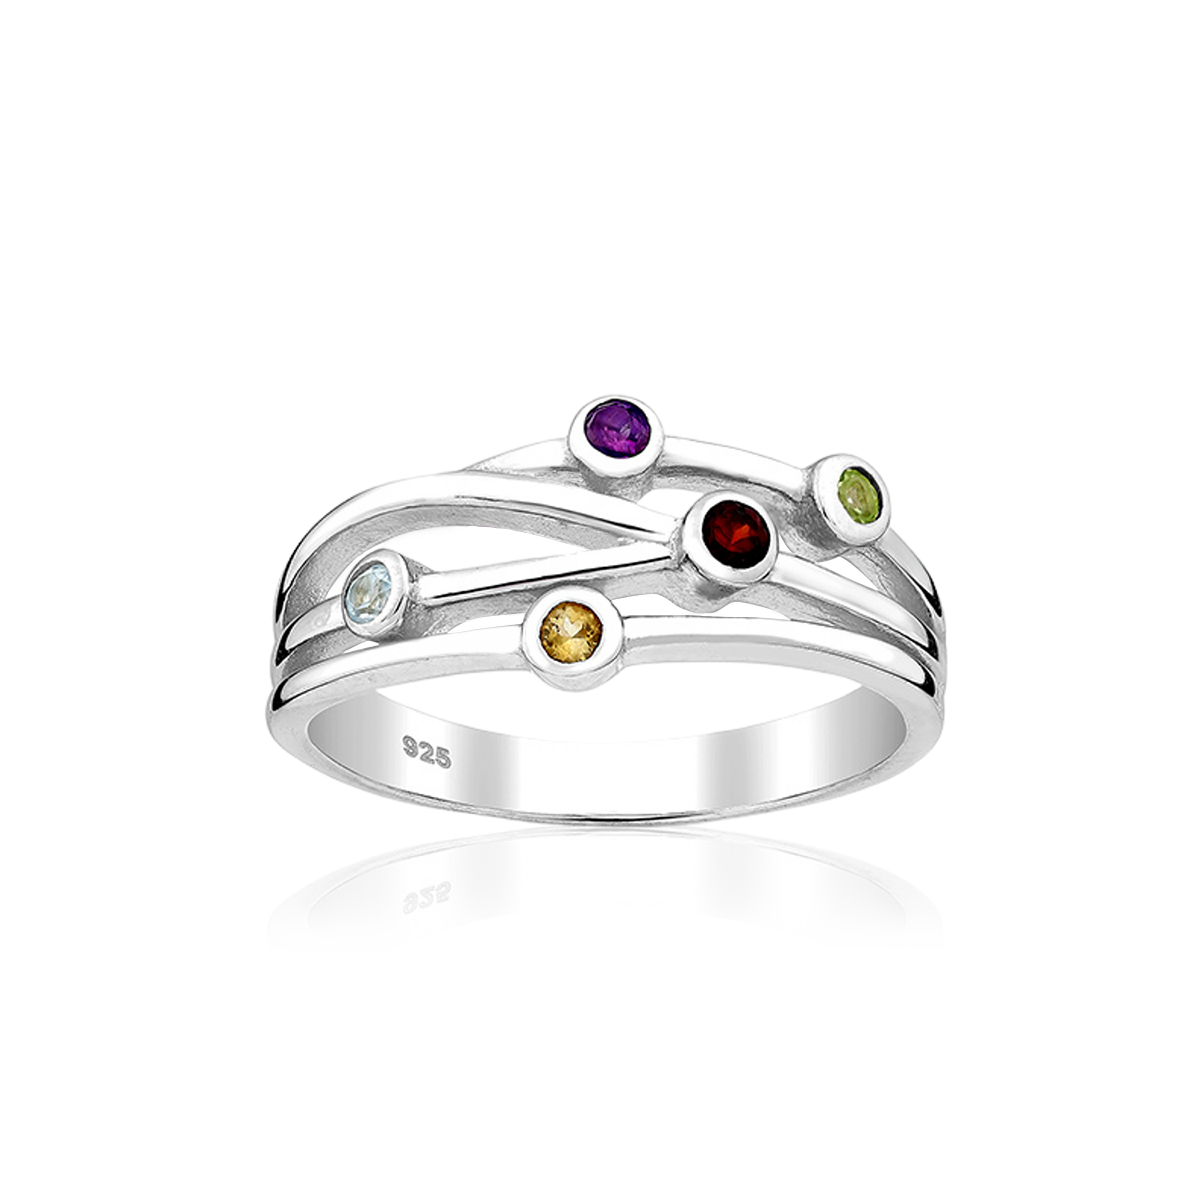 Sterling silver ring with with Amethyst, Citrine, Garnet, Peridot and Sky-Blue Topaz.